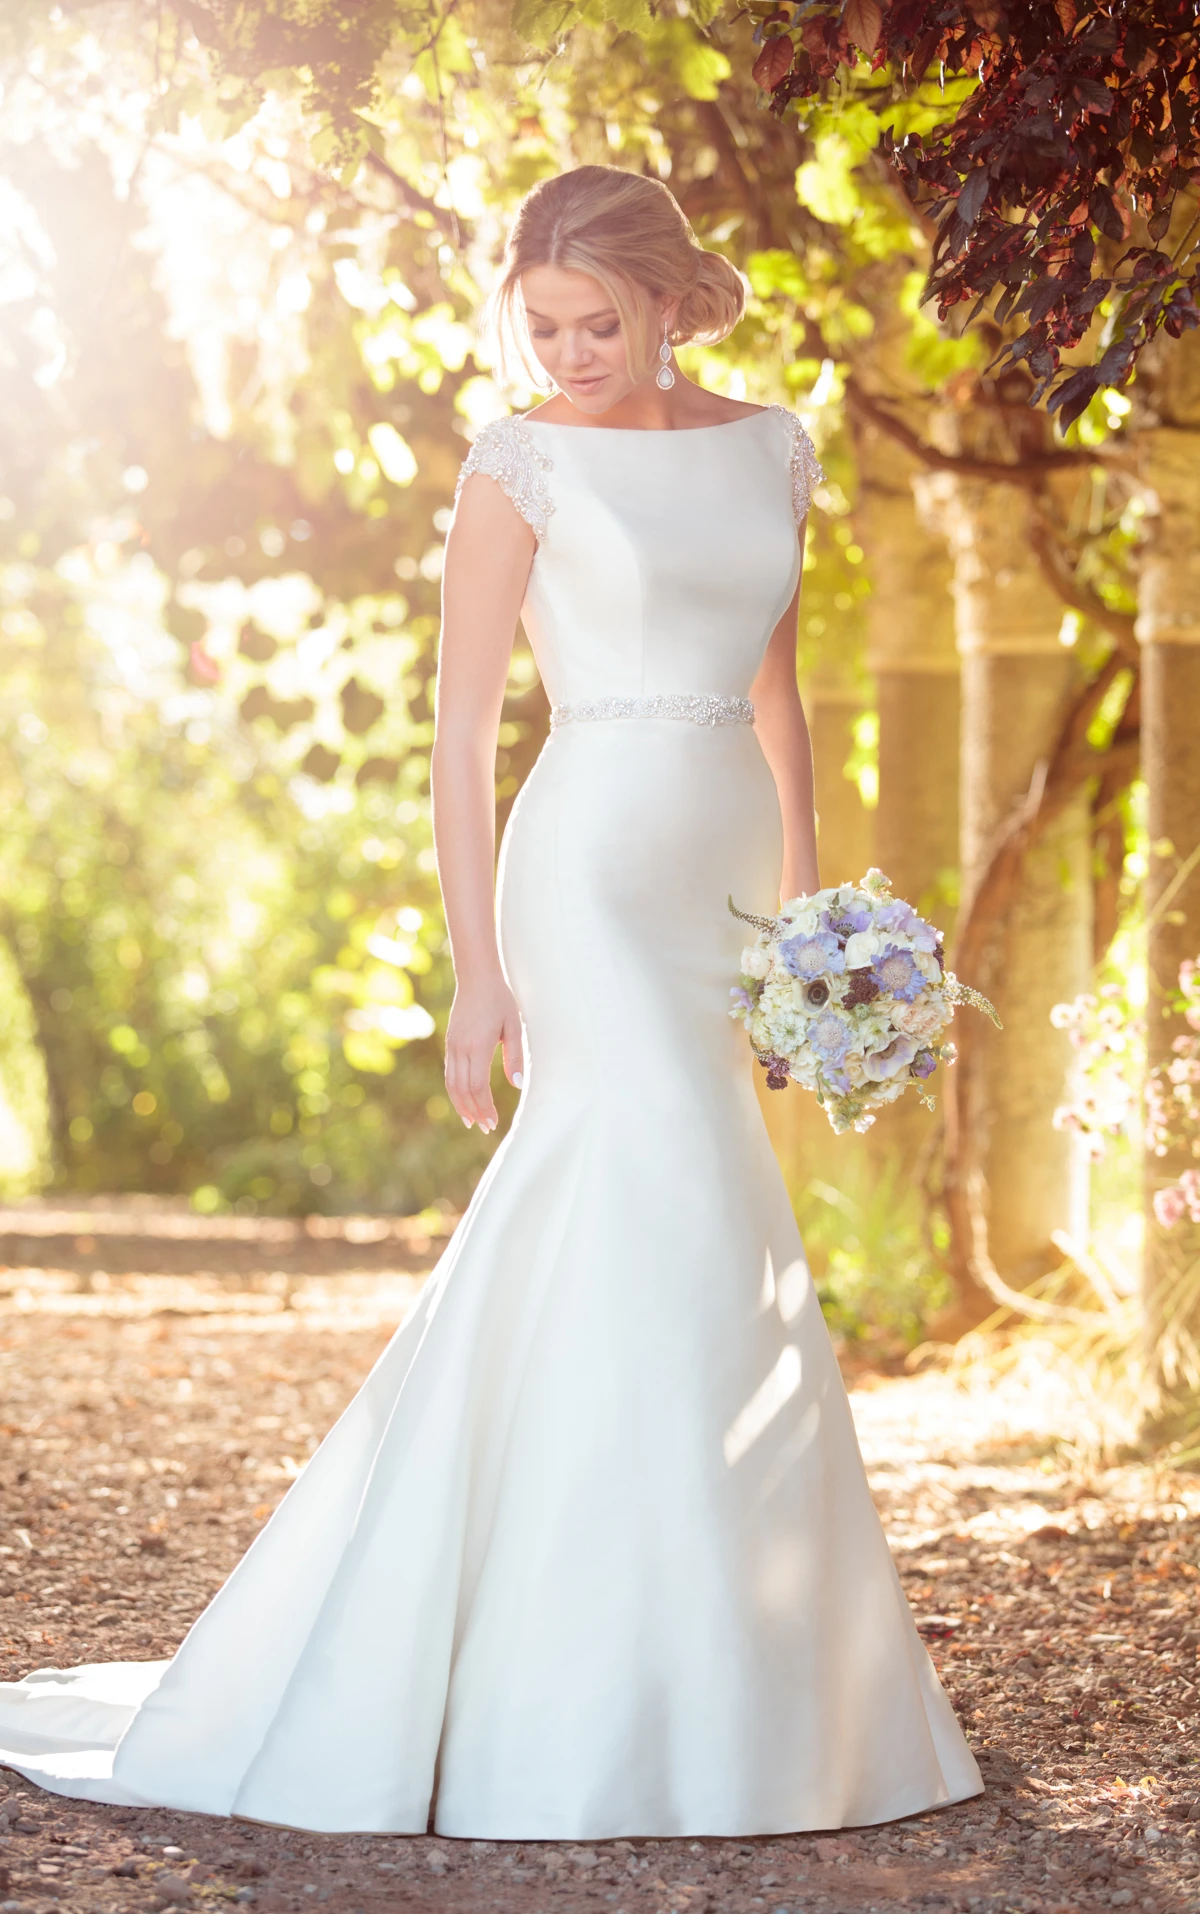 Modern Fit & Flare Wedding Dress with Embellished Cap Sleeves